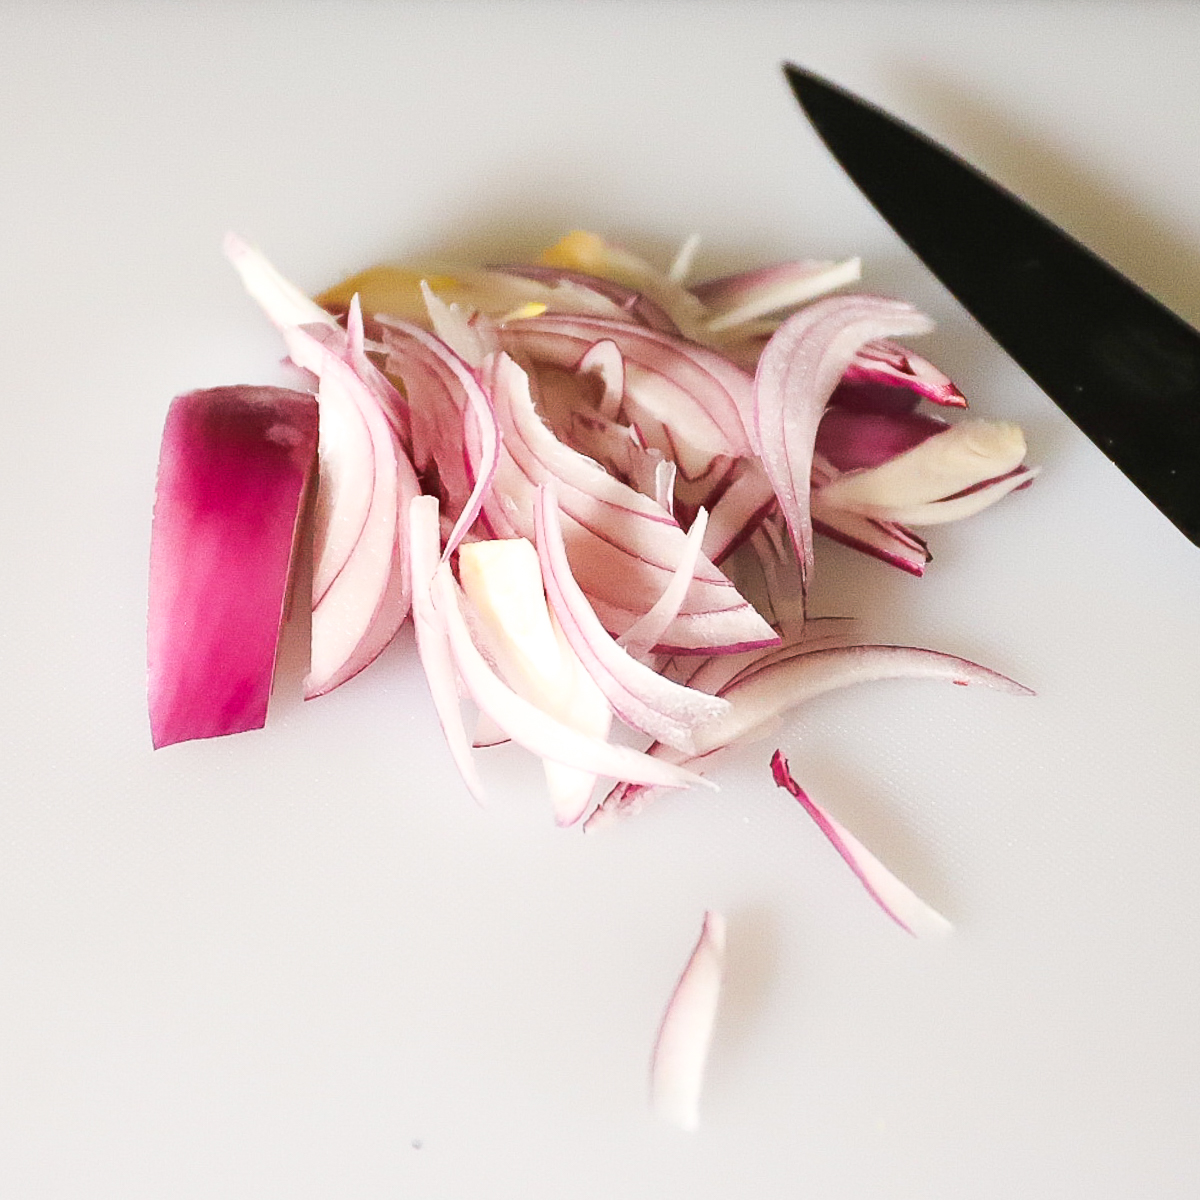 Red onion that has been sliced very thinly with a knife beside the pieces.